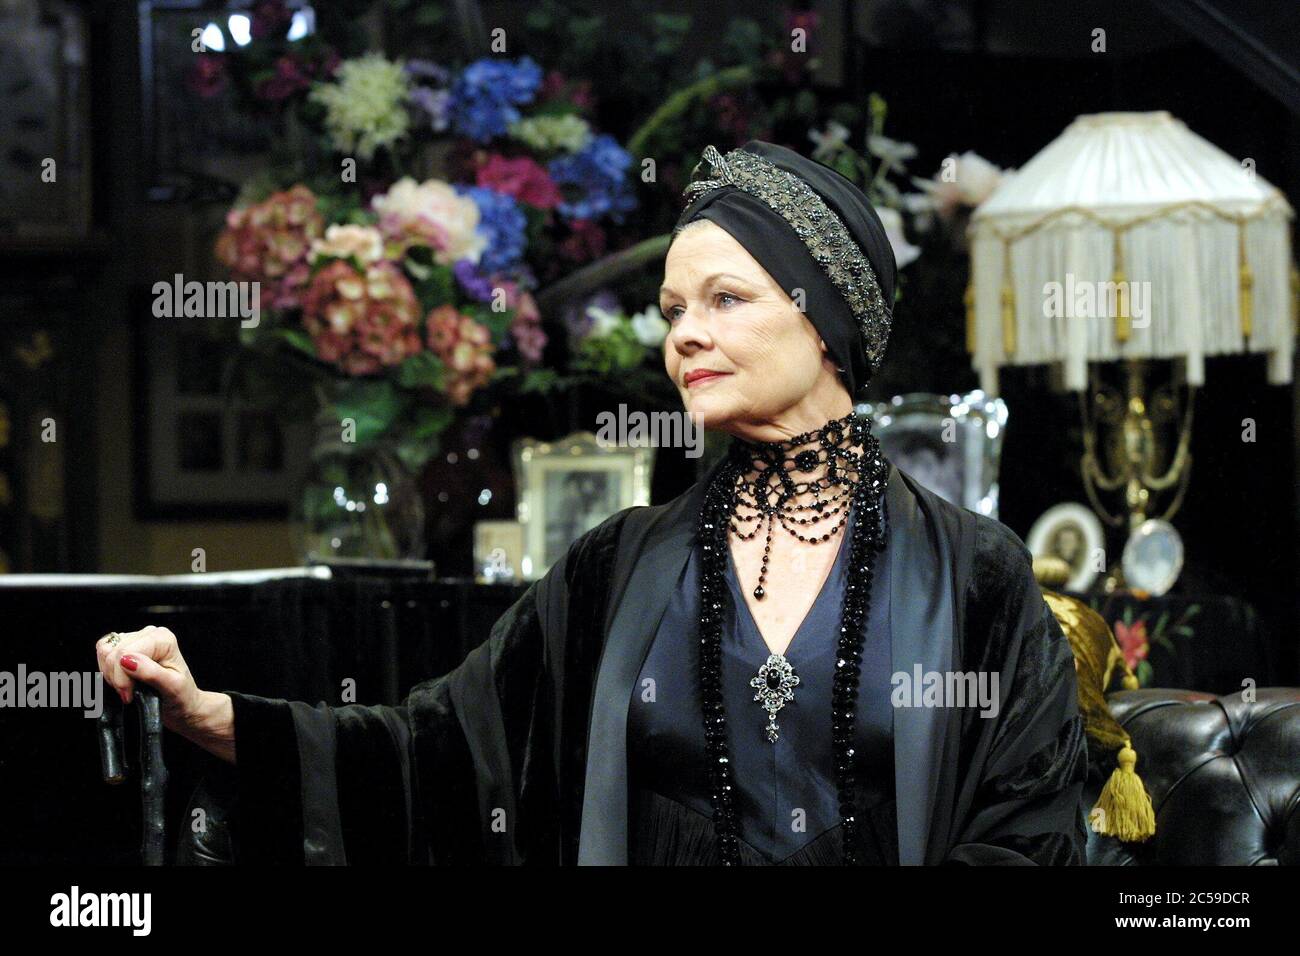 Judi Dench (Fanny Cavendish) in THE ROYAL FAMILY by George S. Kaufman & Edna Ferber at the Theatre Royal Haymarket, London SW1  01/11/2001  design: Anthony Ward  lighting: Jon Buswell  director: Peter Hall Stock Photo